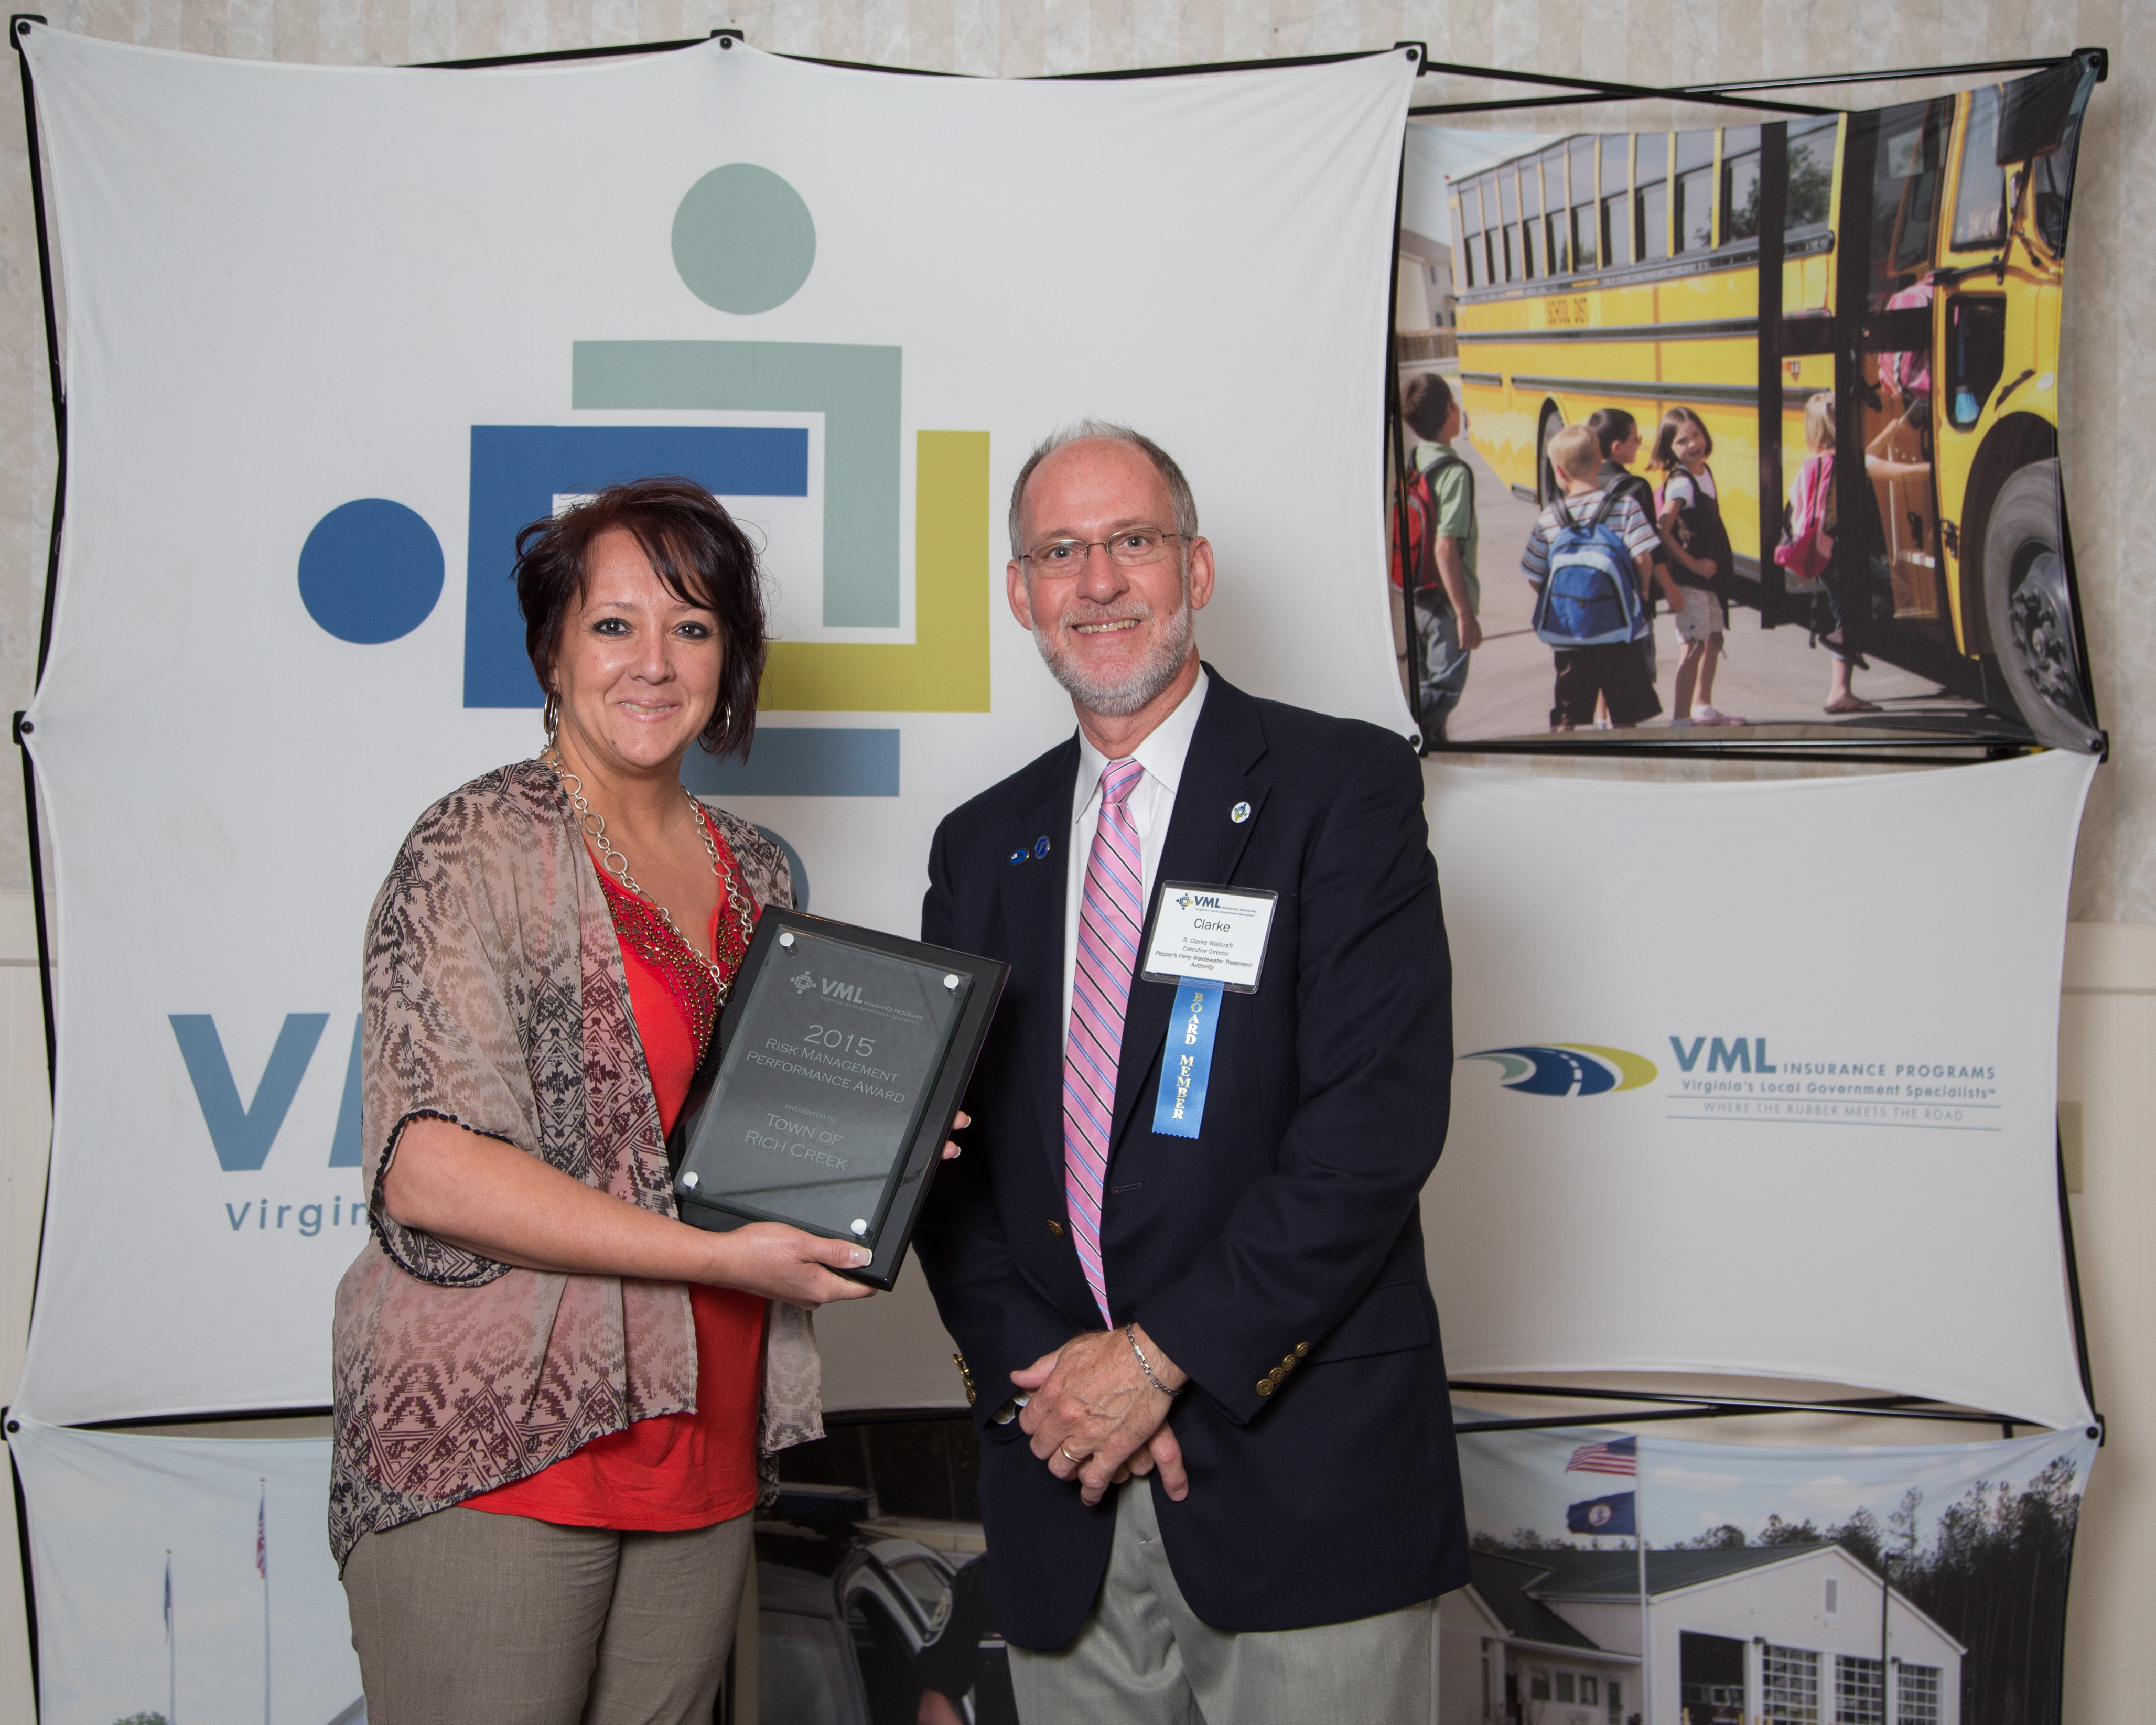 (L to R): Town of Rick Creek Town Clerk and Treasurer Pam Kantsios accepts the award with VMLIP Members’ Supervisory Board Member Clarke Wallcraft 